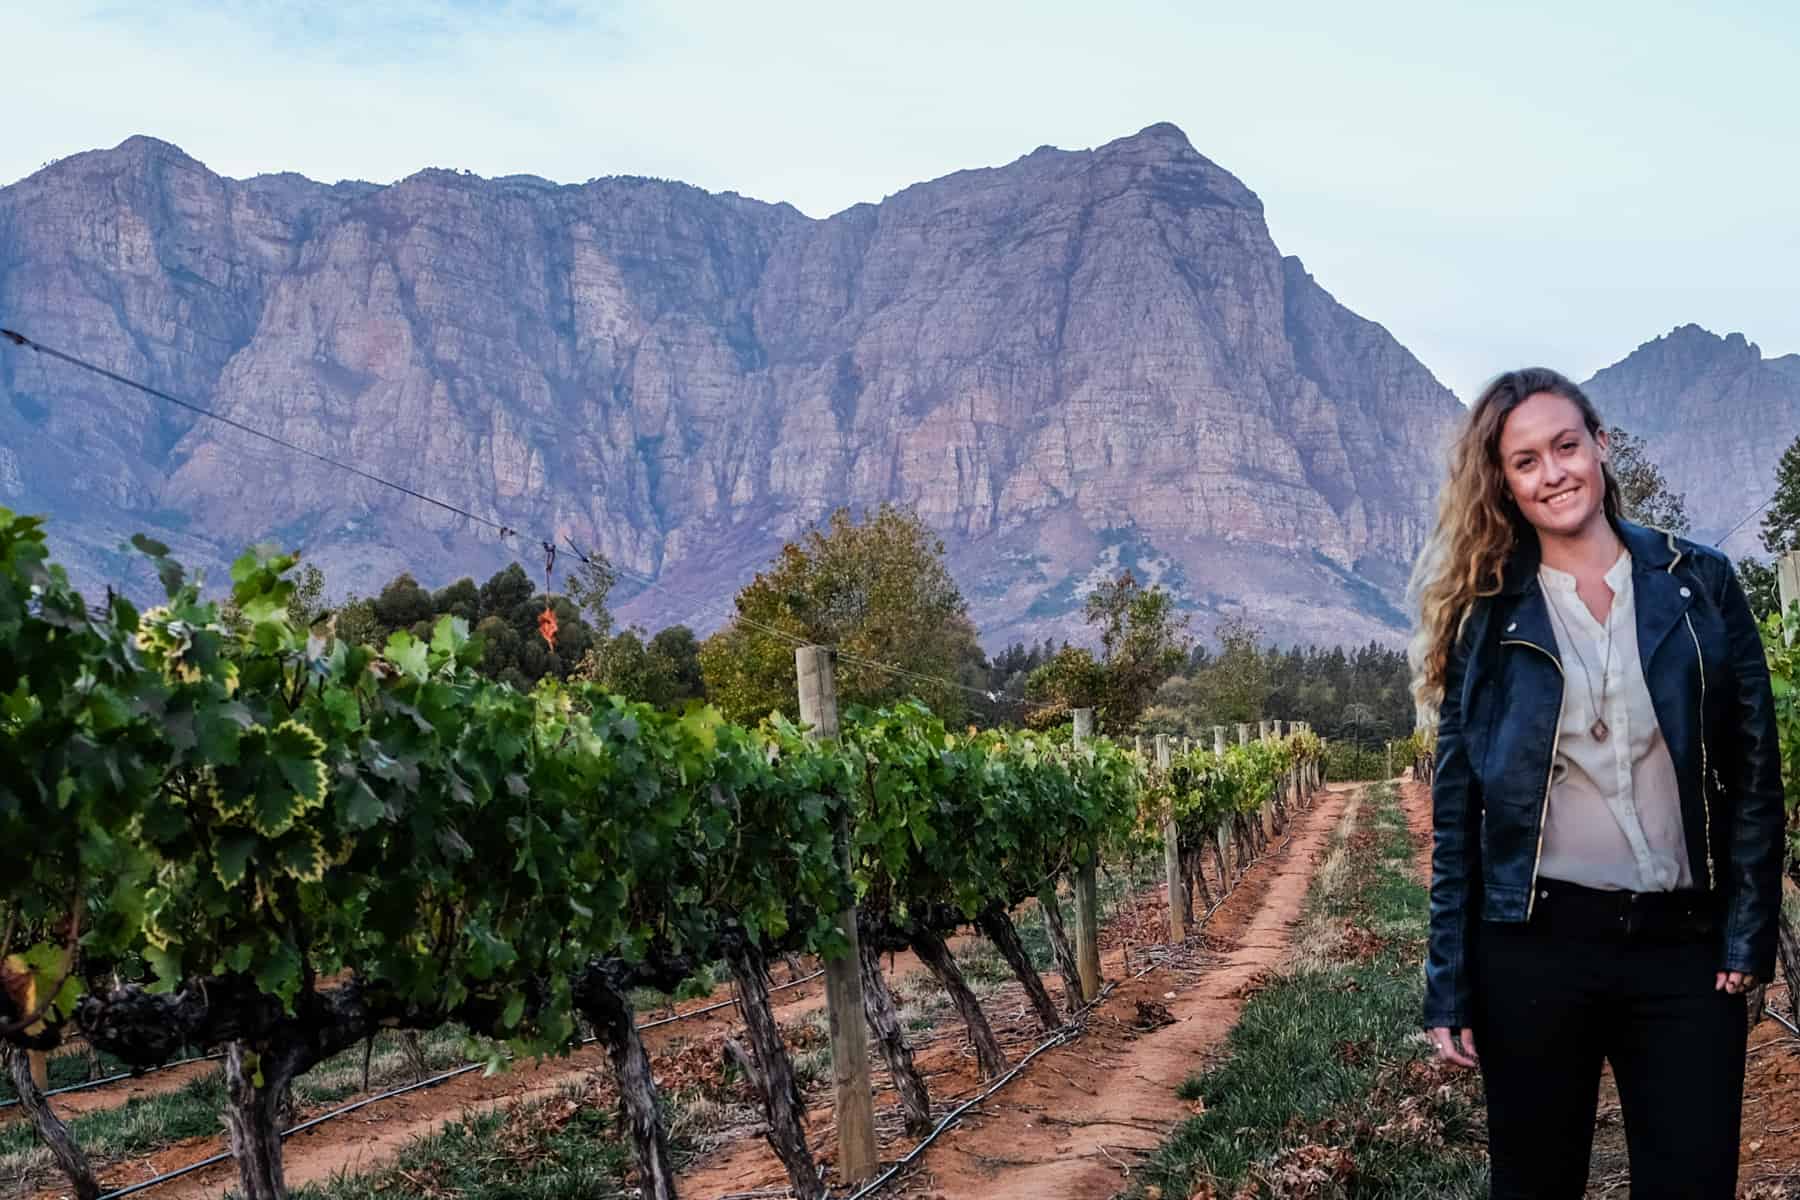 A woman wearing black and white looks into the camera as she walks through a blooming vineyard full of green vine rows, orange dirt tracks and a mountainous backdrop. She is visiting the Delaire Graff Estate in Stellenbosch 